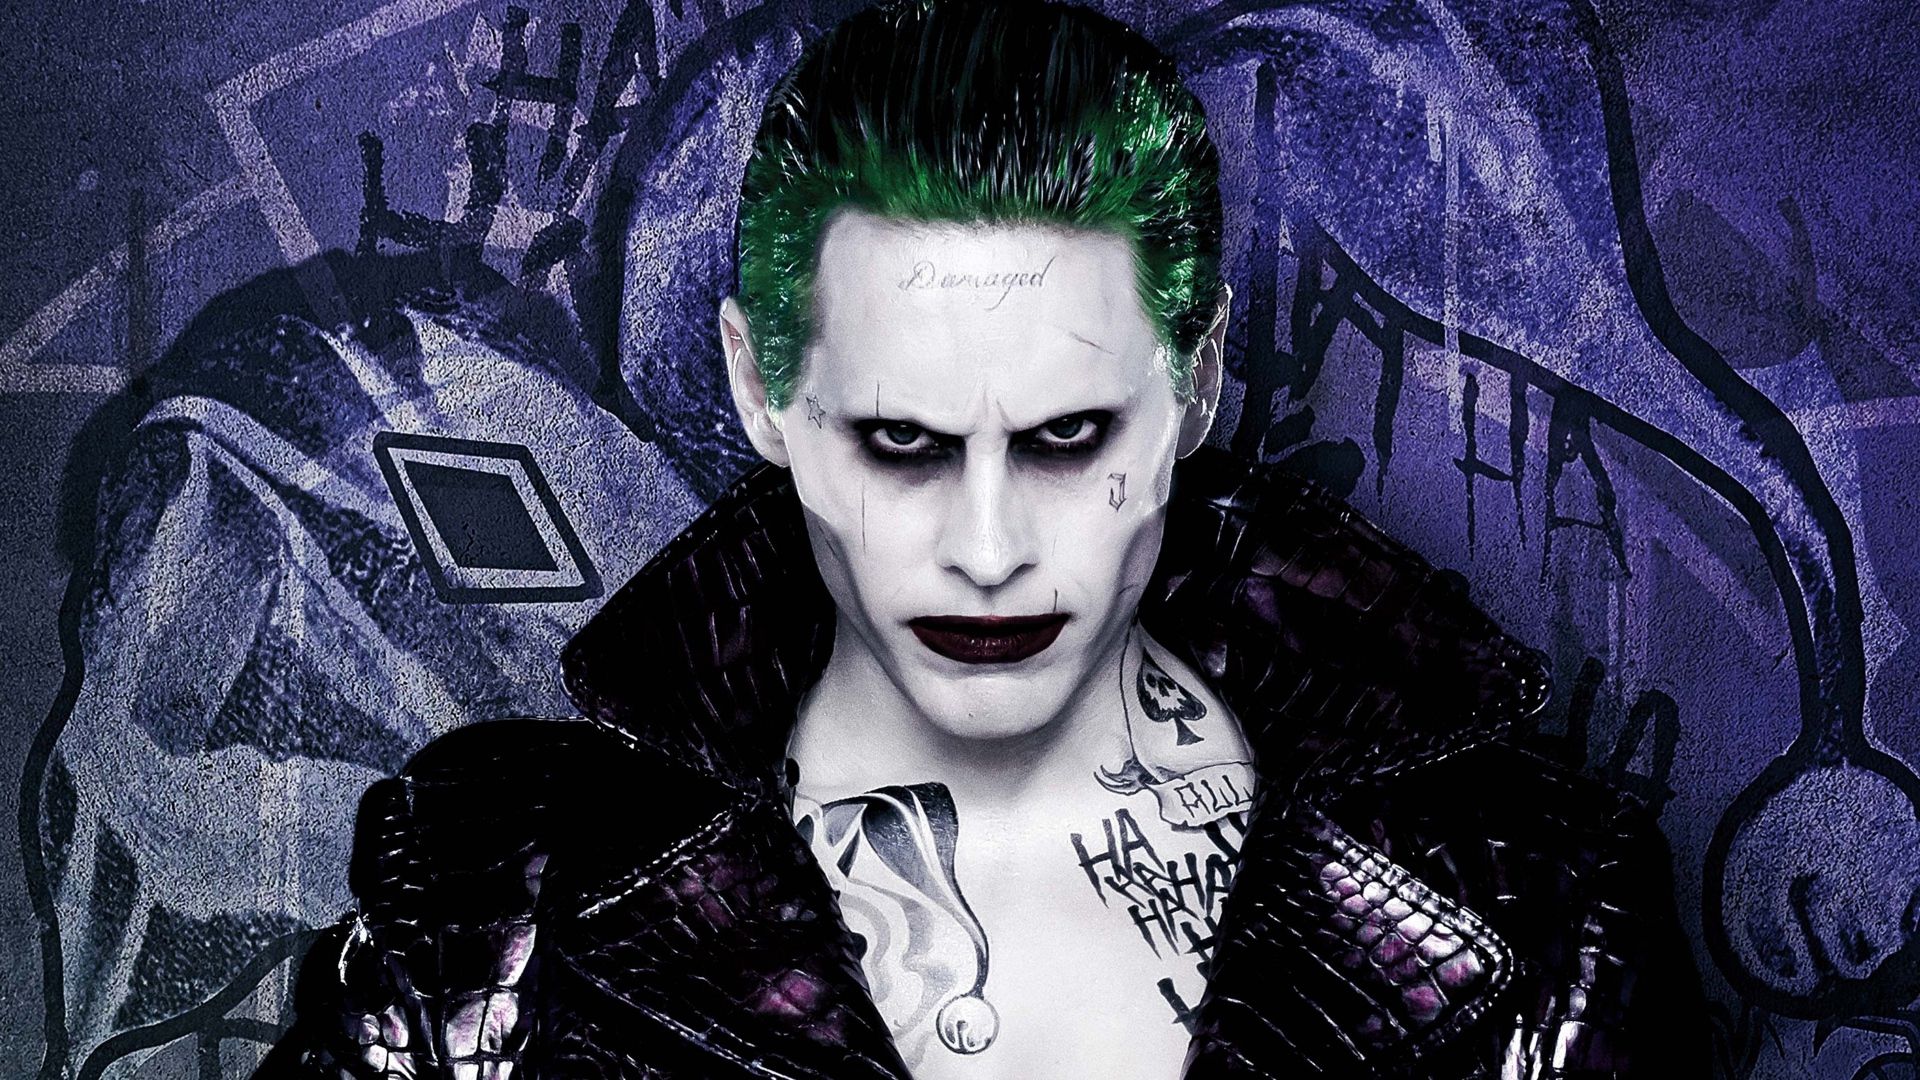 7. Joker Suicide Squad Tattoo Inspiration and Examples - wide 1